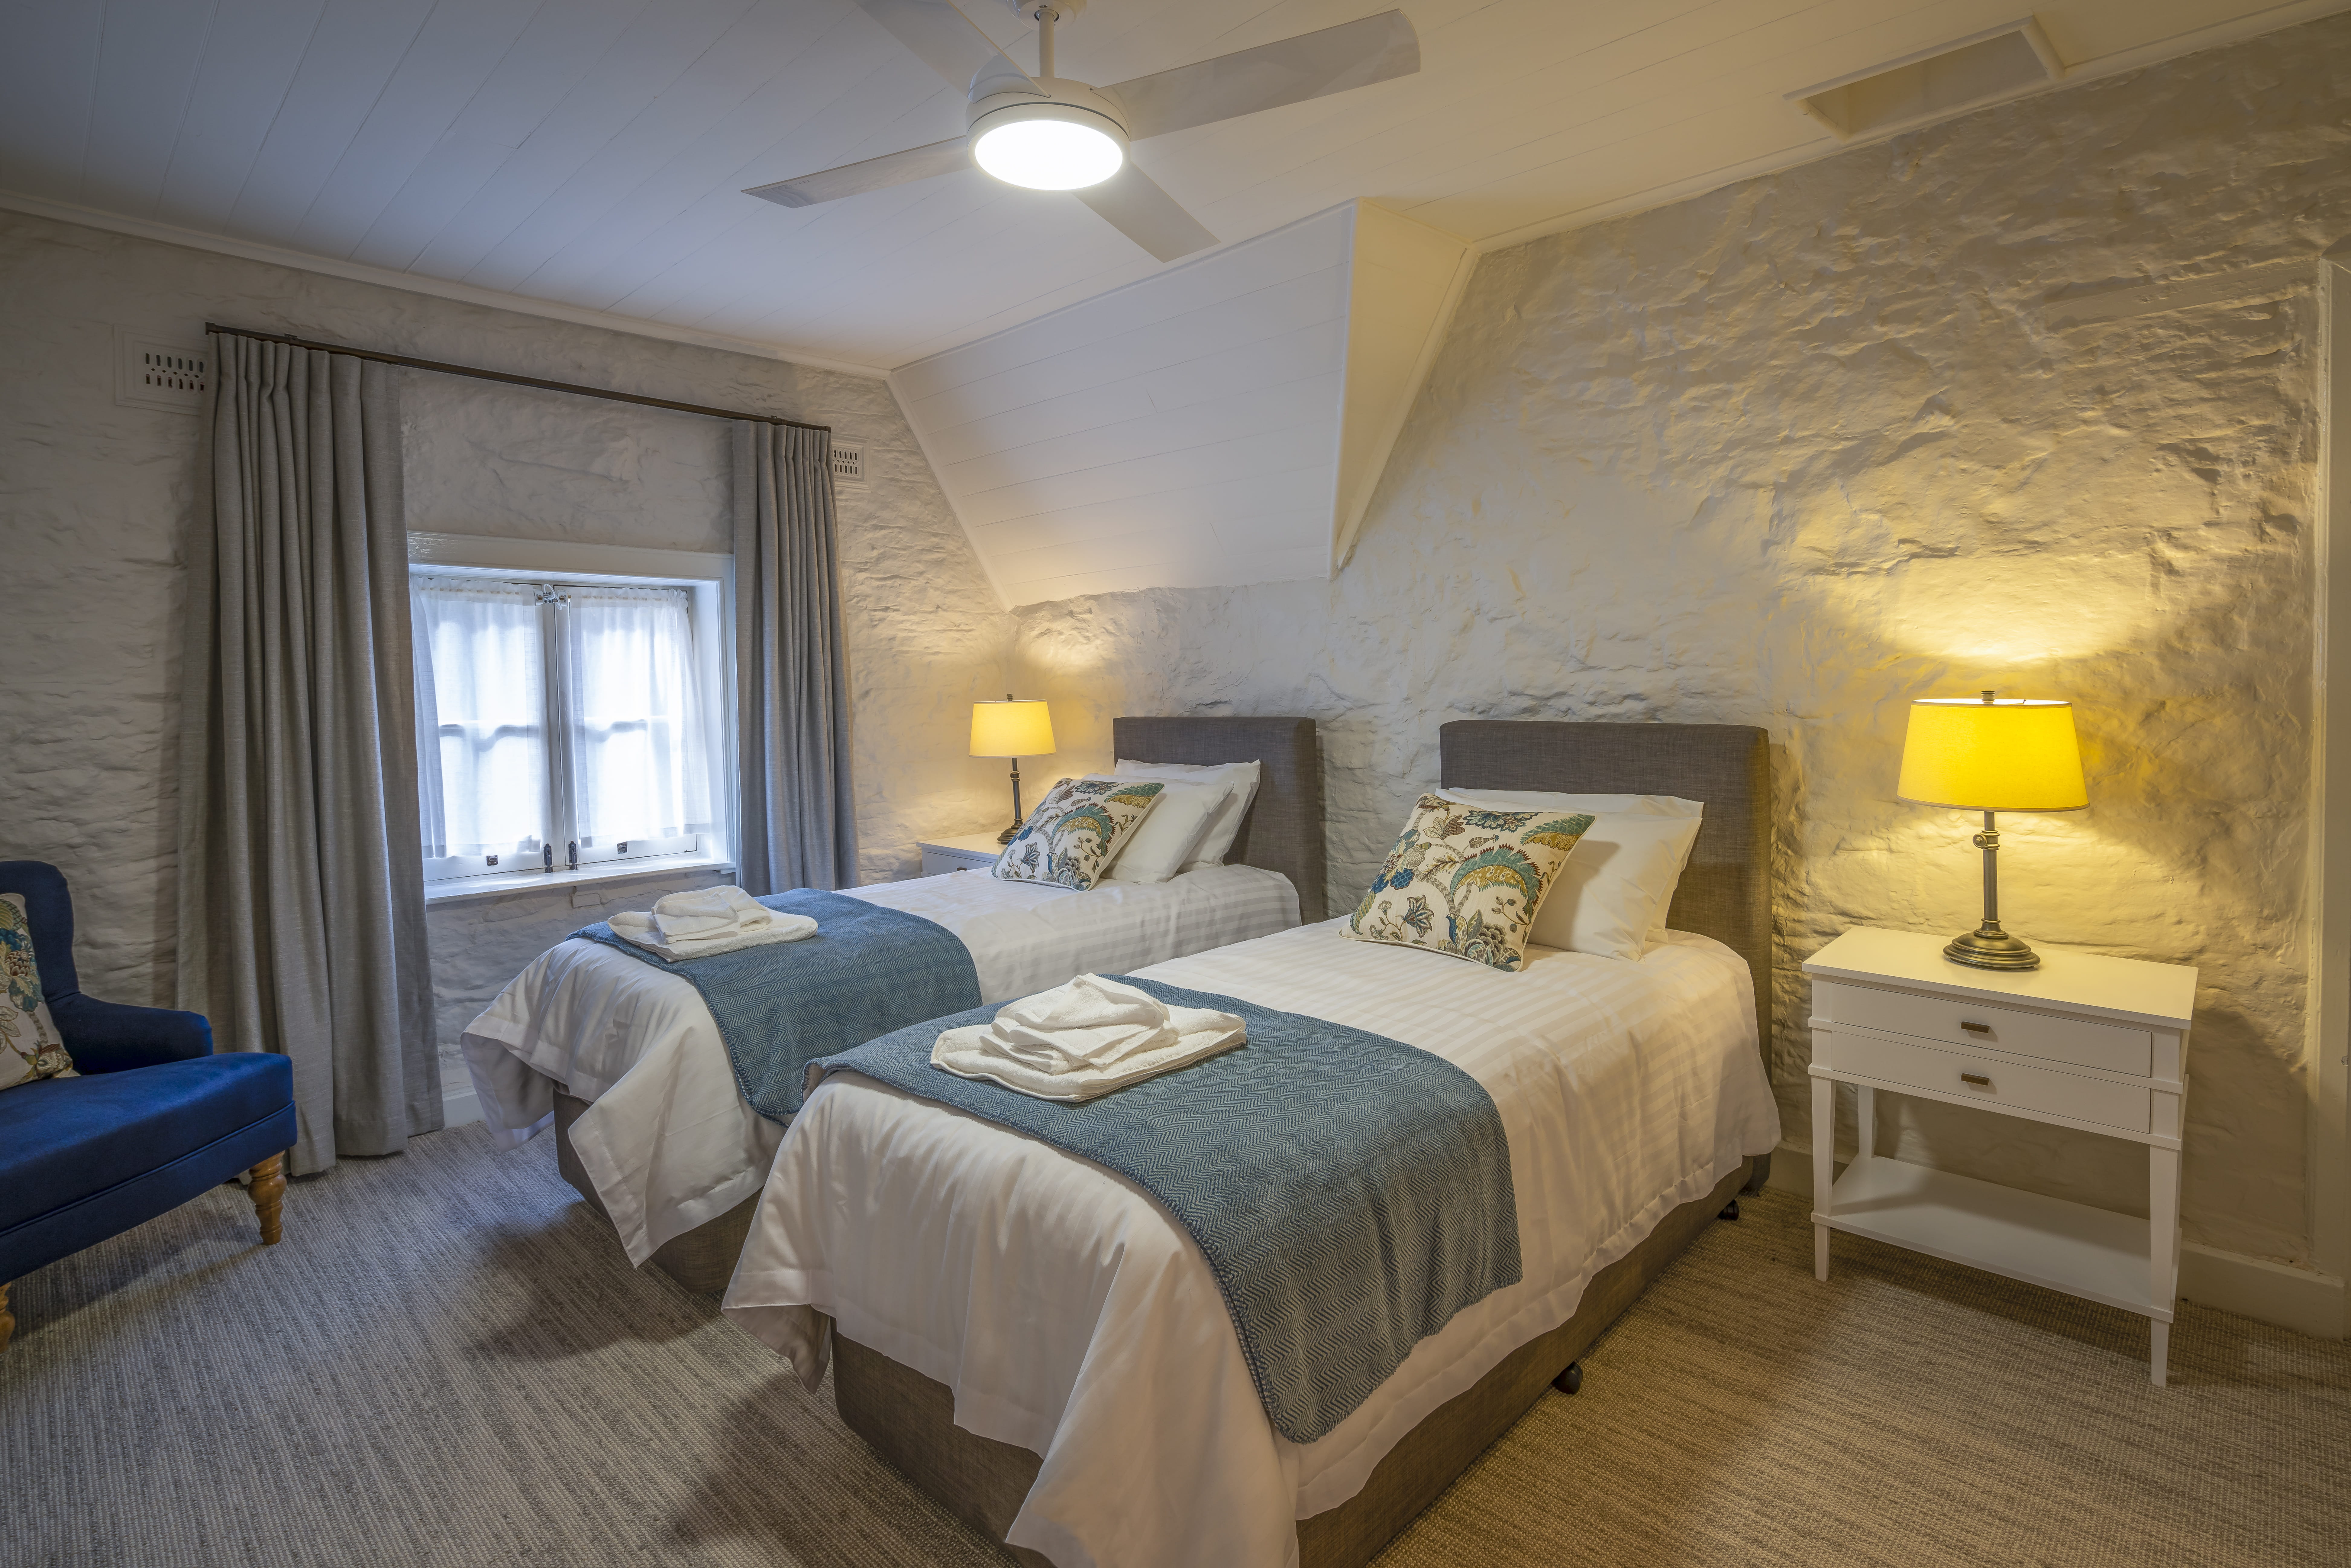 A bedroom with 2 single beds at Gardeners Cottage, Sydney Harbour National Park. Photo:  John Spencer/DPIE